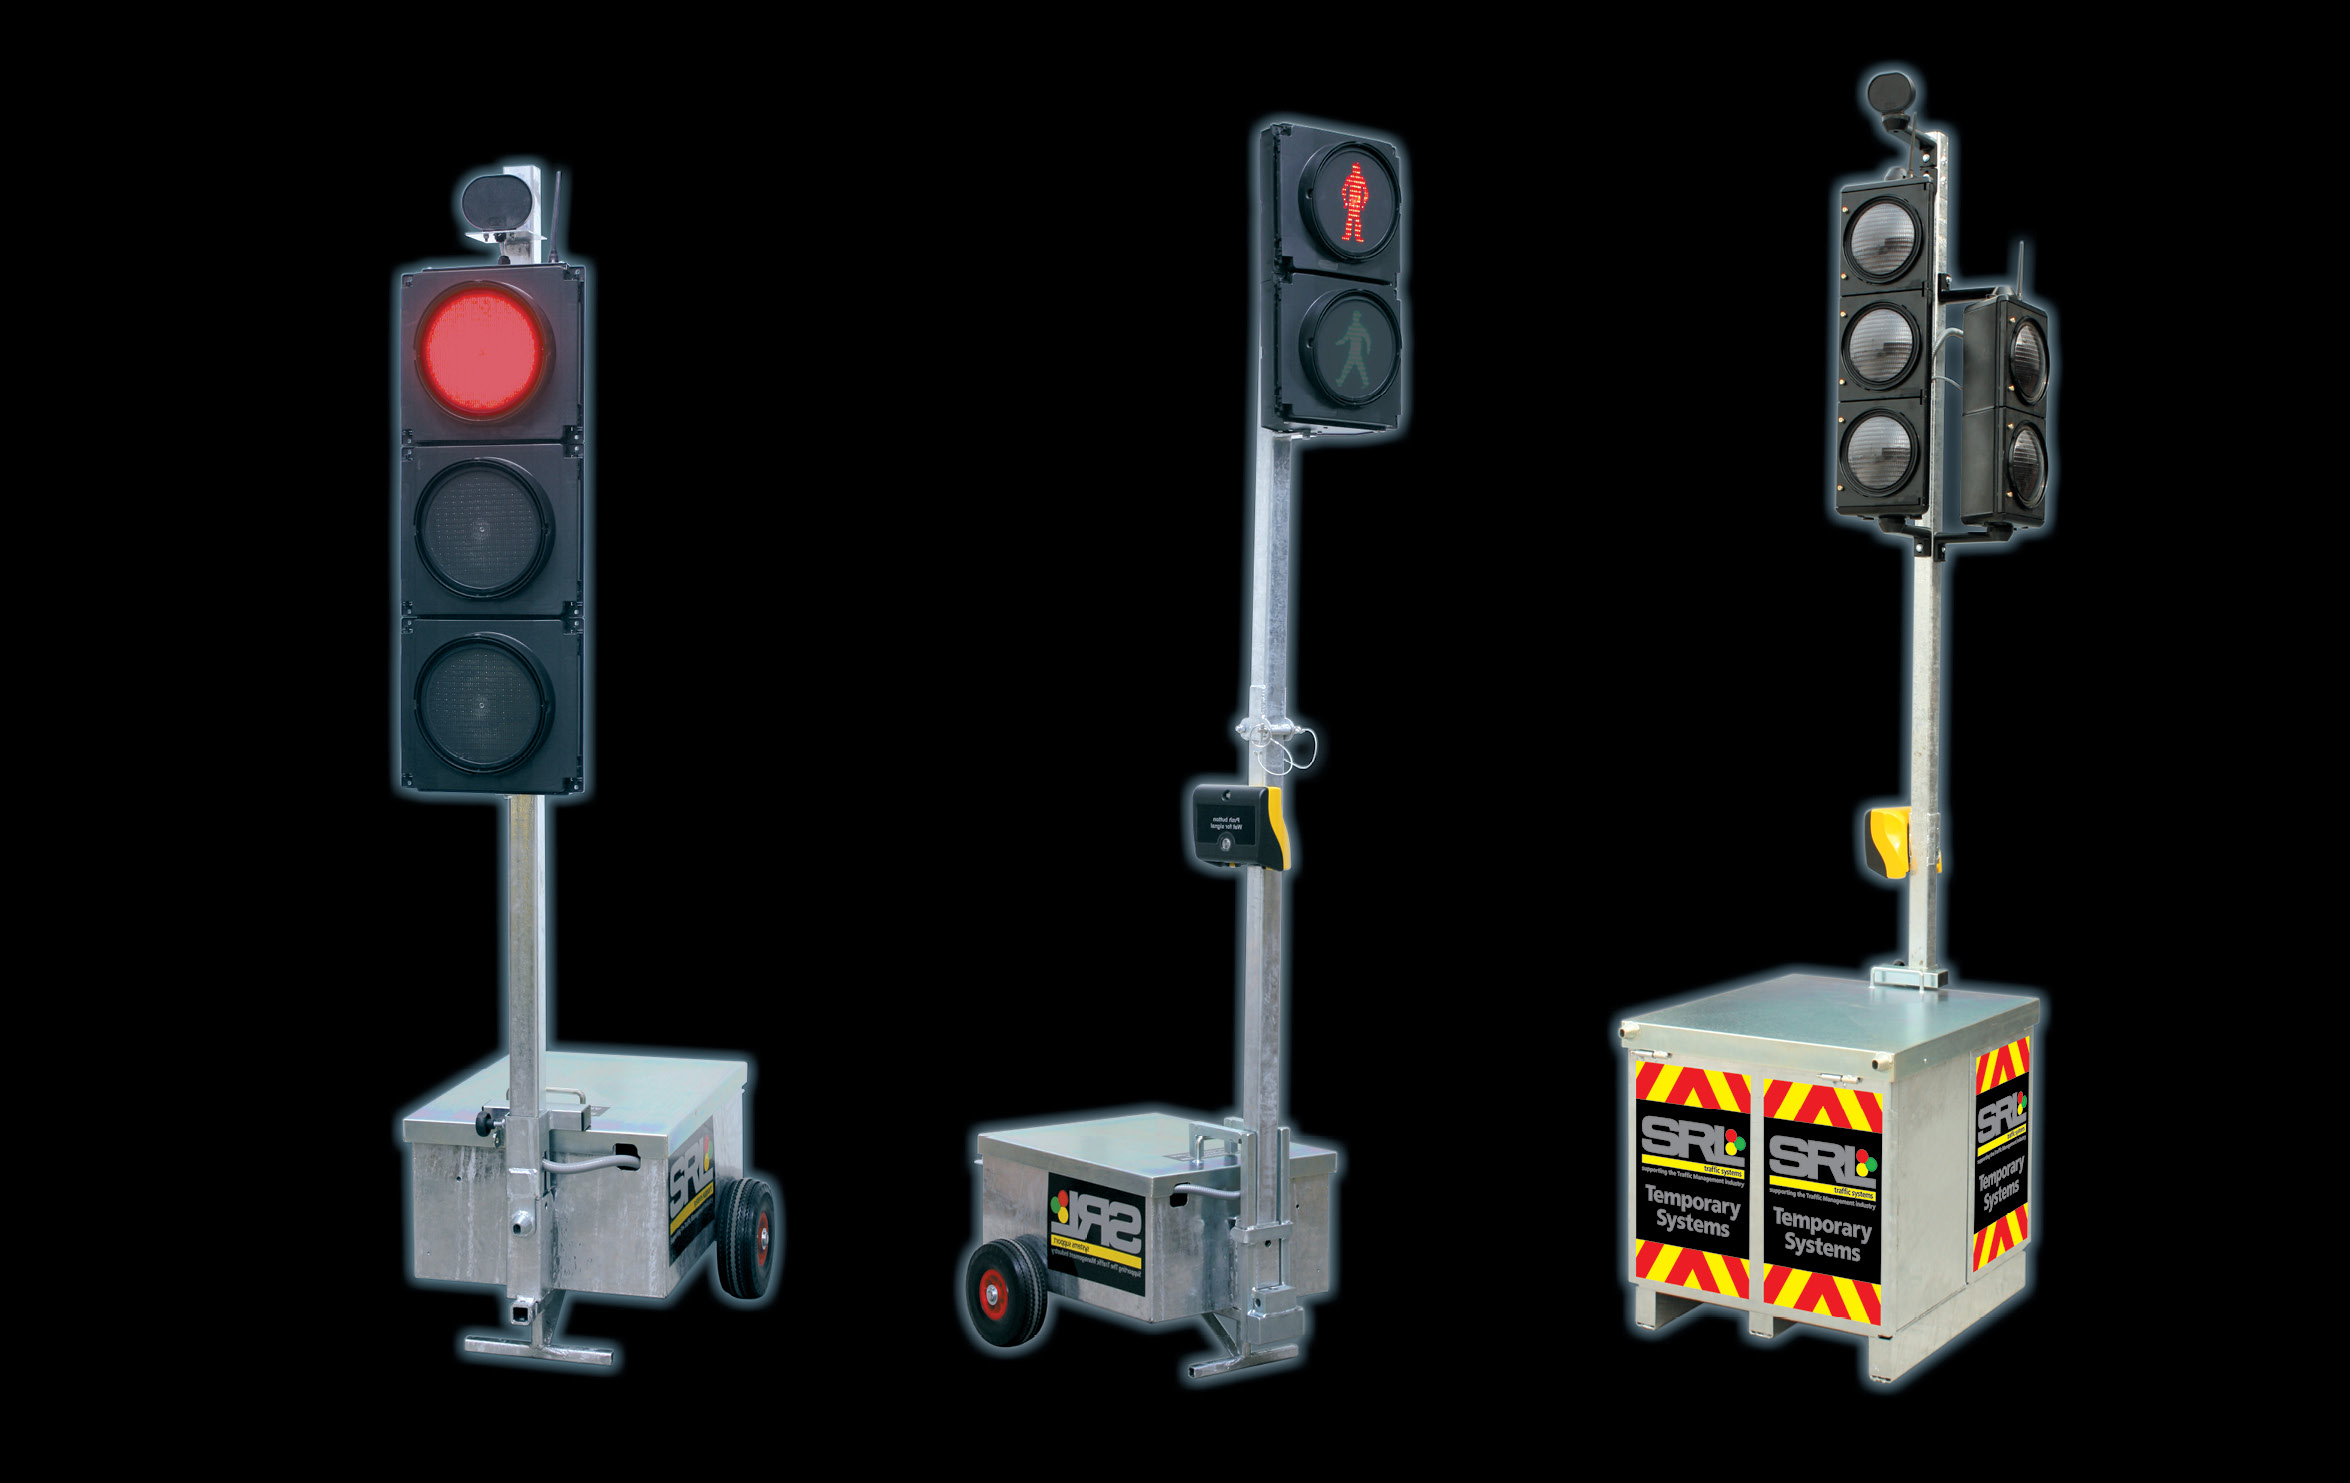 The UK's largest fleet of portable and temporary traffic lights